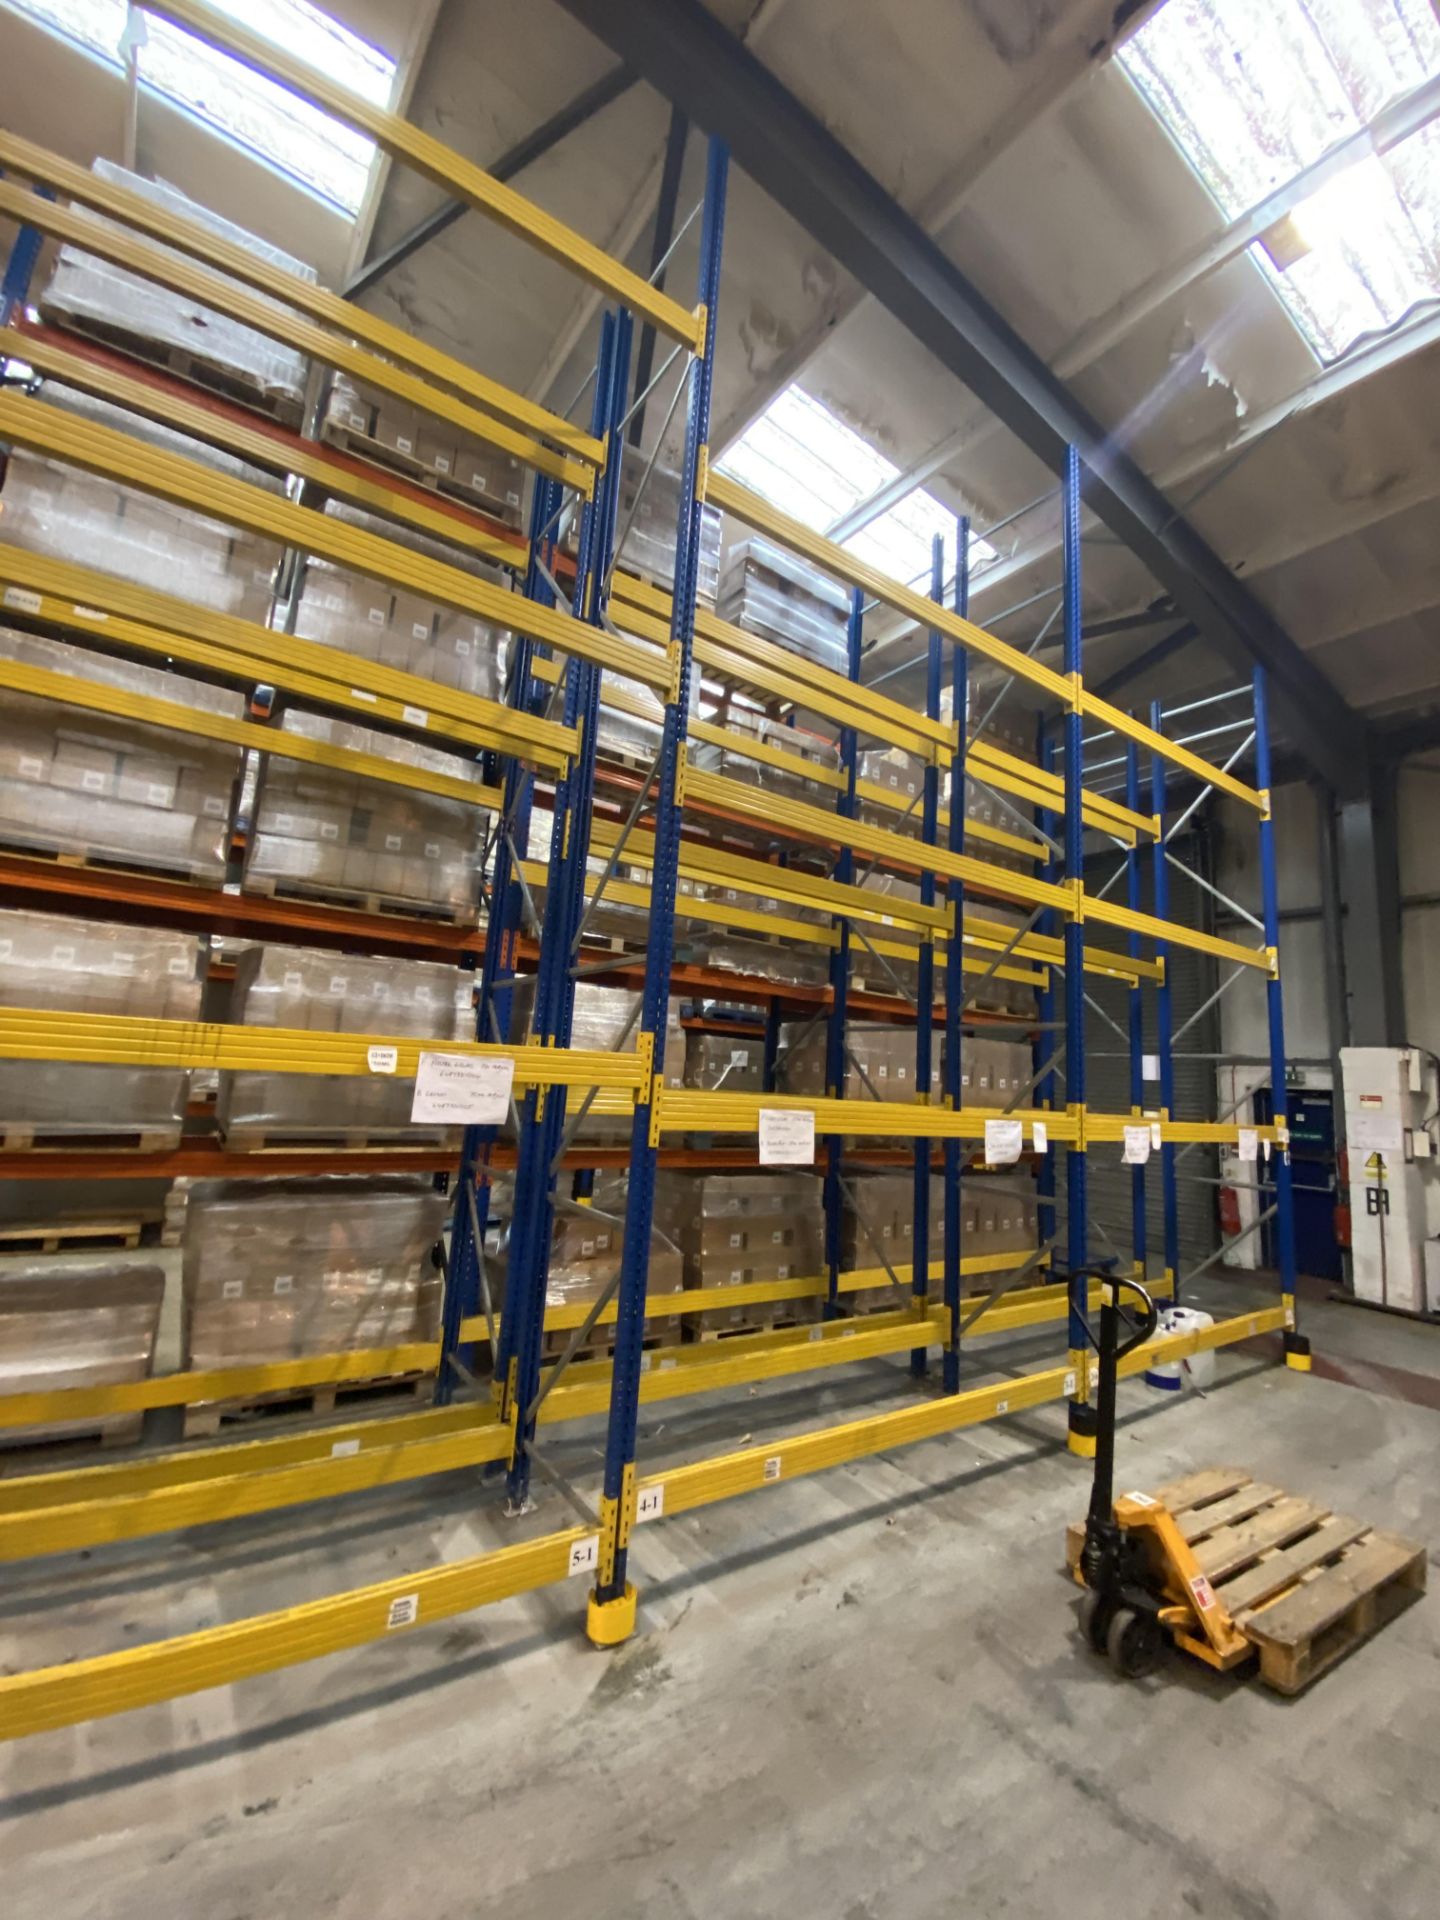 Ten Bay Mainly Four Tier Boltless Pallet Rack, each bay approx. 2.8m x 900mm x 6m high (excluding - Image 3 of 3